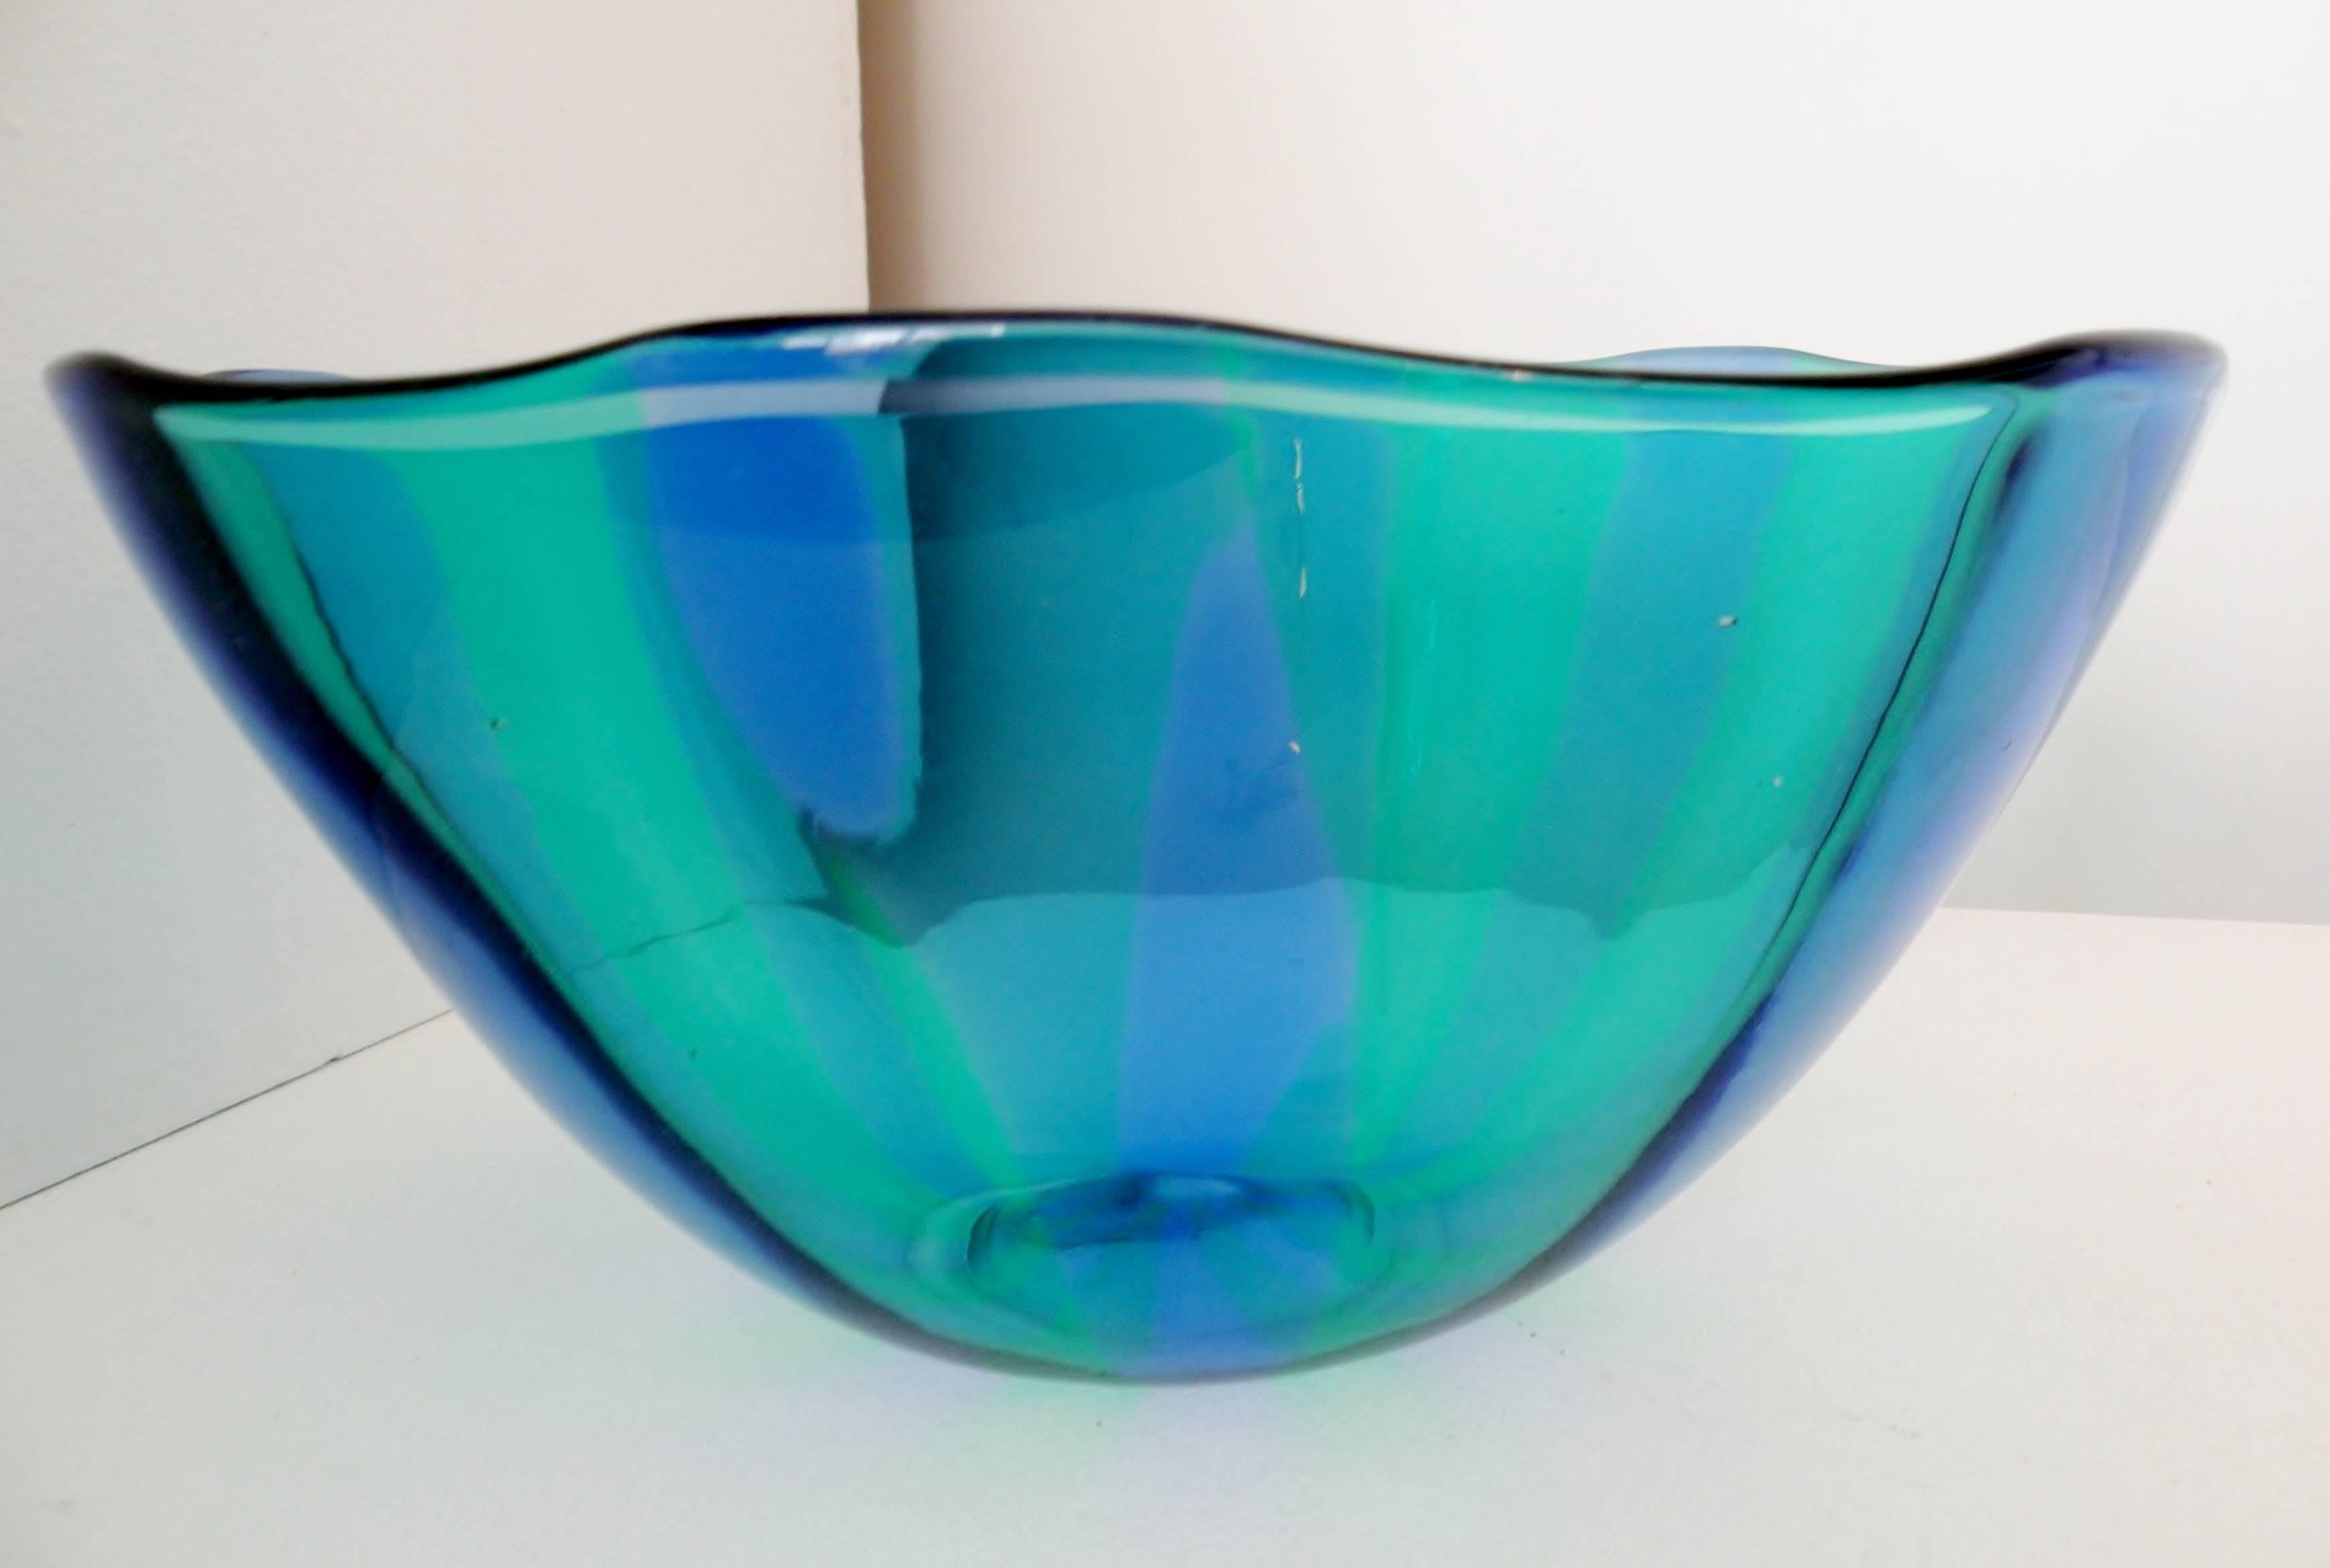 Large Venini Fulvio Bianconi Fasce Verticali Green and Blue Bowl In Excellent Condition For Sale In Denver, CO